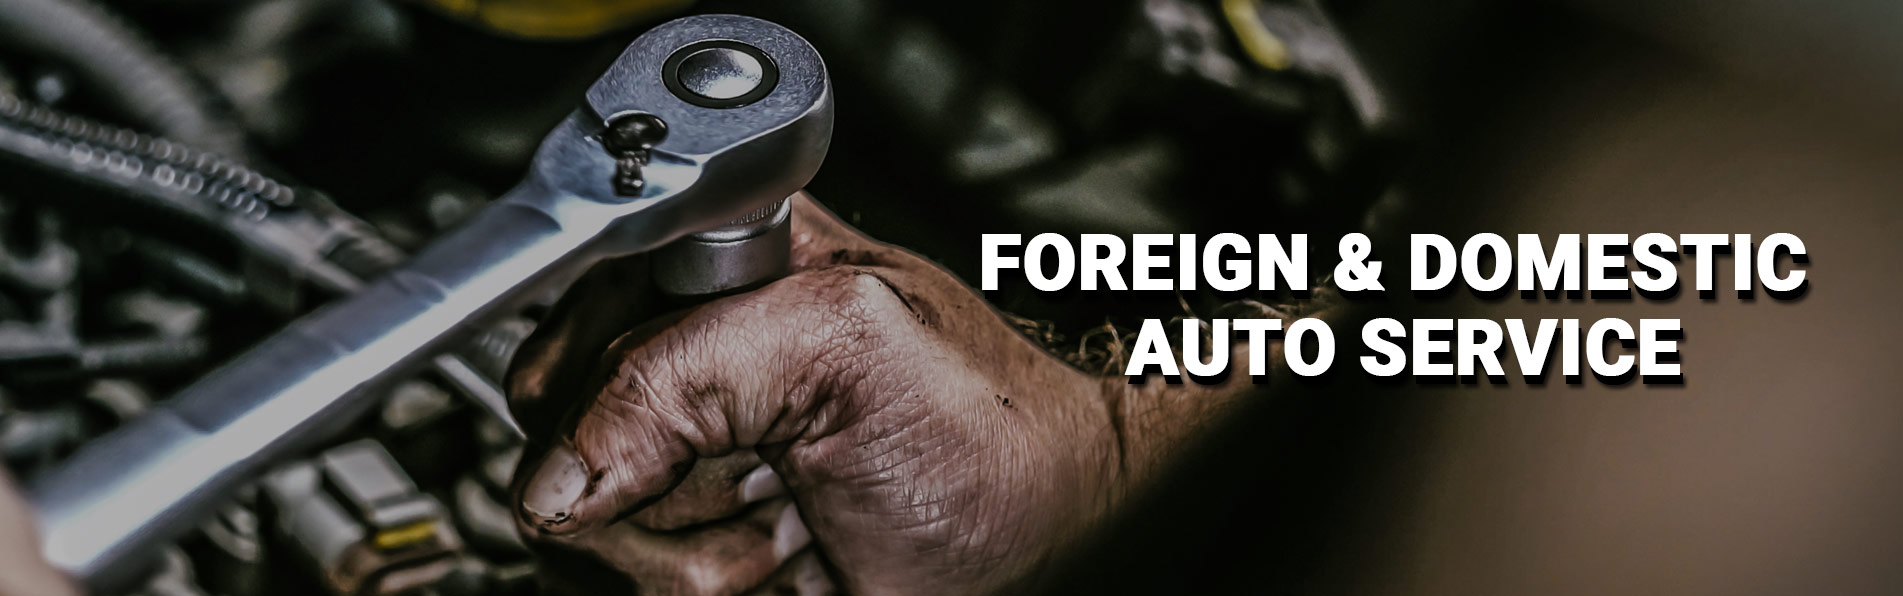 Foreign and Domestic Auto Service